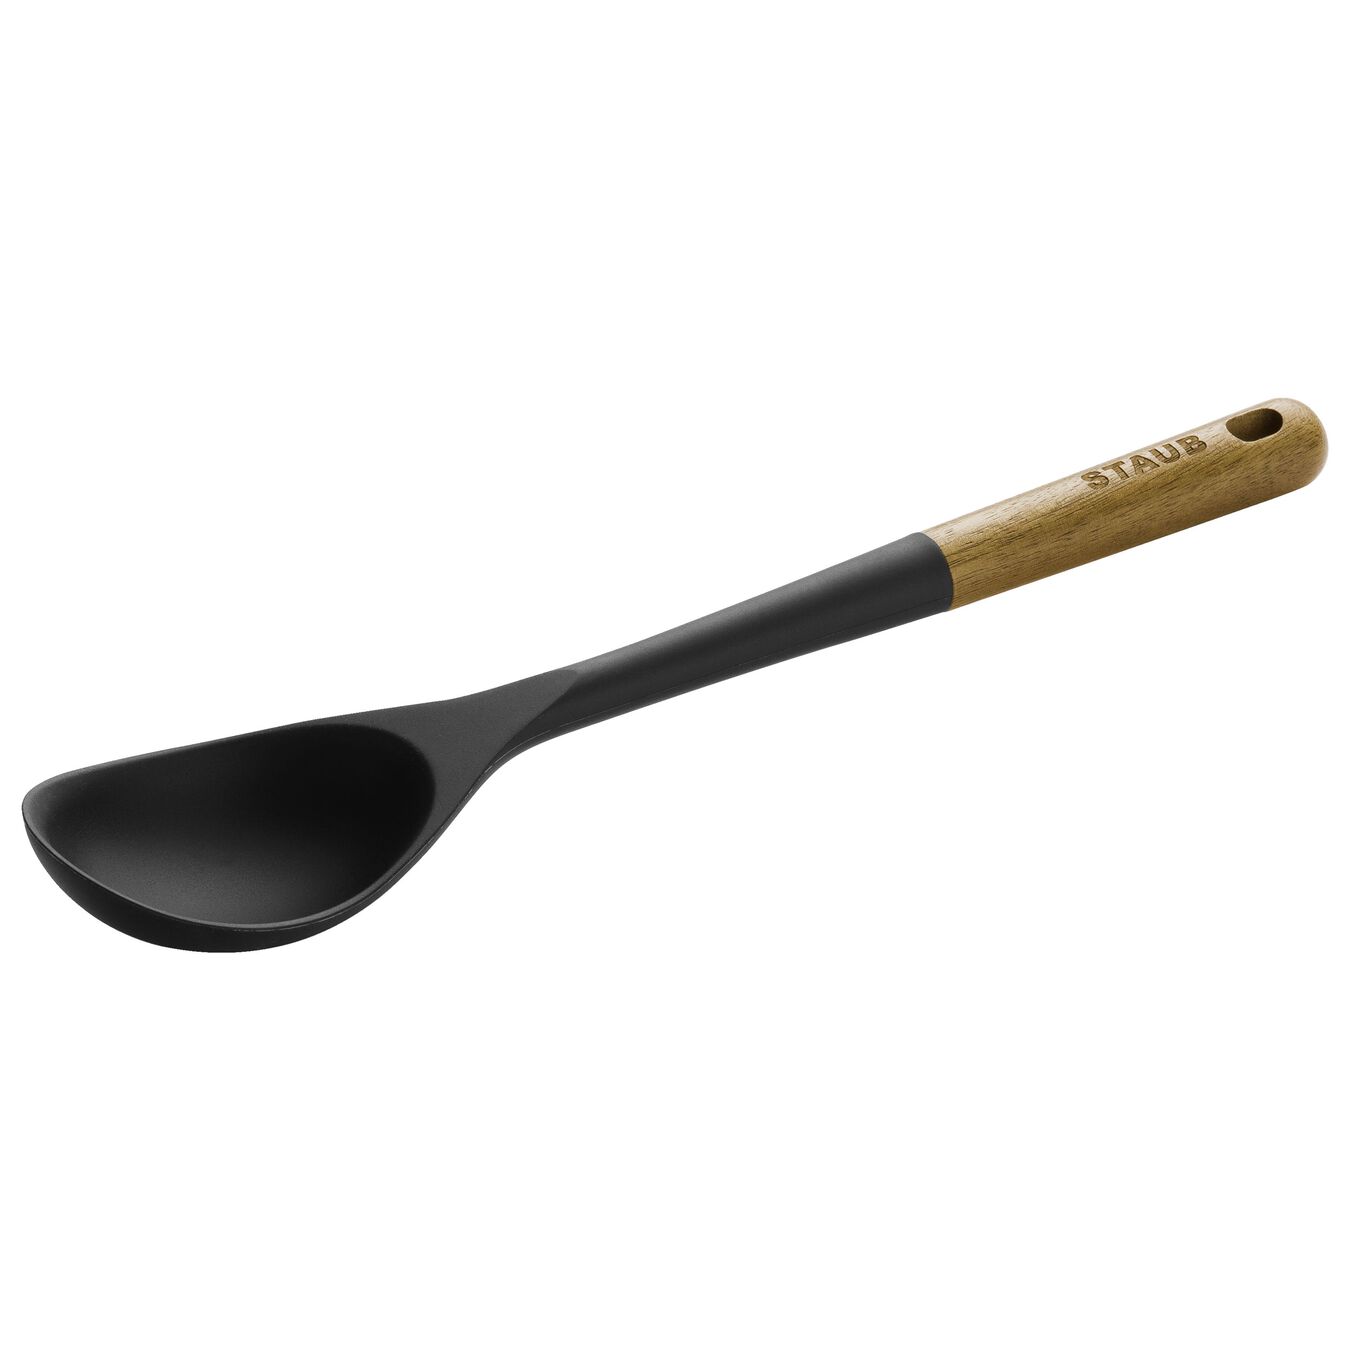 Serving spoon, 31 cm, silicone,,large 1